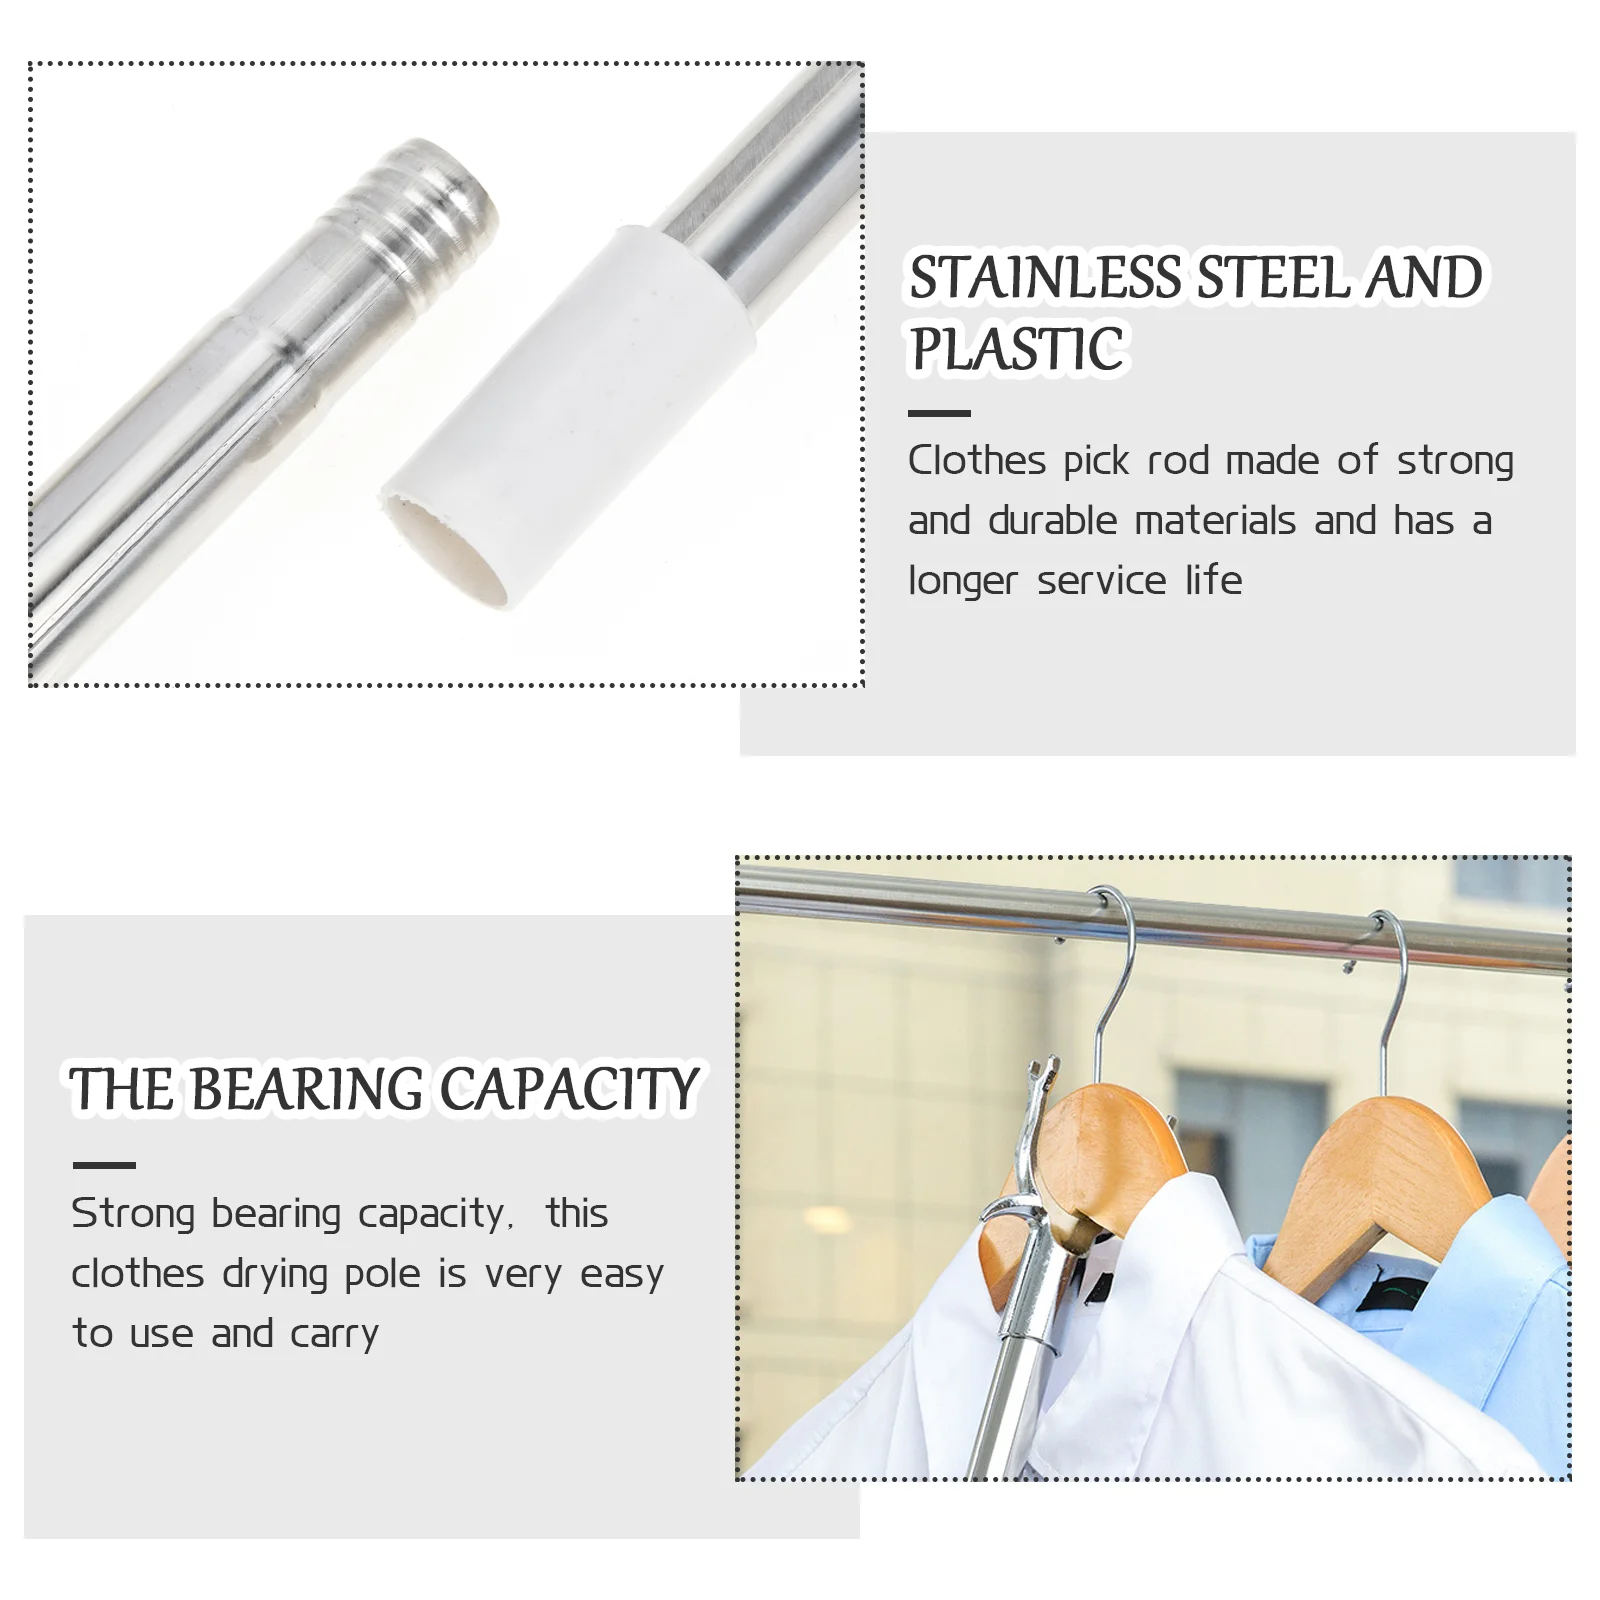 https://ae01.alicdn.com/kf/S33f5ed7c4d414826b8738363bbf1d805P/Closet-Hook-Pole-Clothes-Picking-Rod-To-Take-Clothes-Drying-Dressing-Reacher-Stick-Clothesline-Reaching-Clothing.jpg